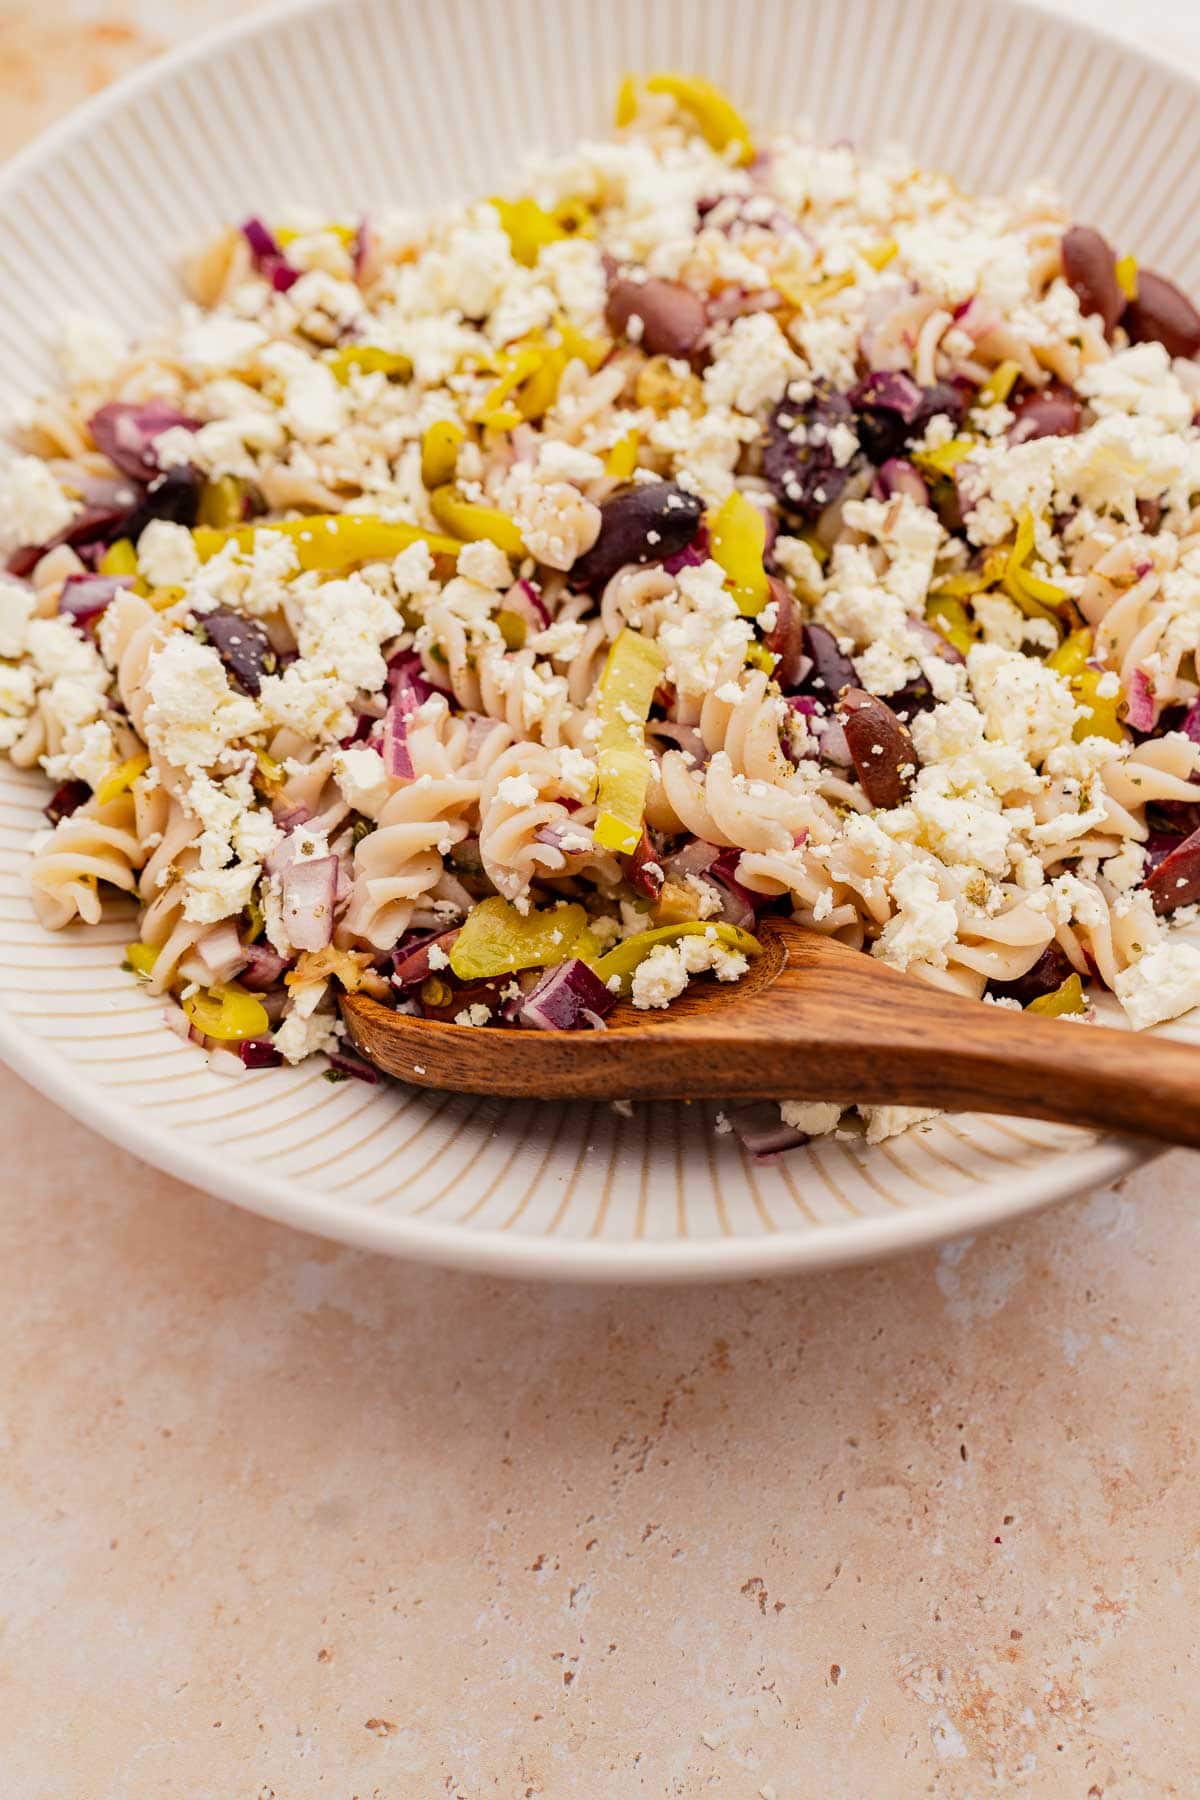 A bowl of Greek pasta salad with olives, feta cheese, and red onions, mixed together with a wooden spoon.